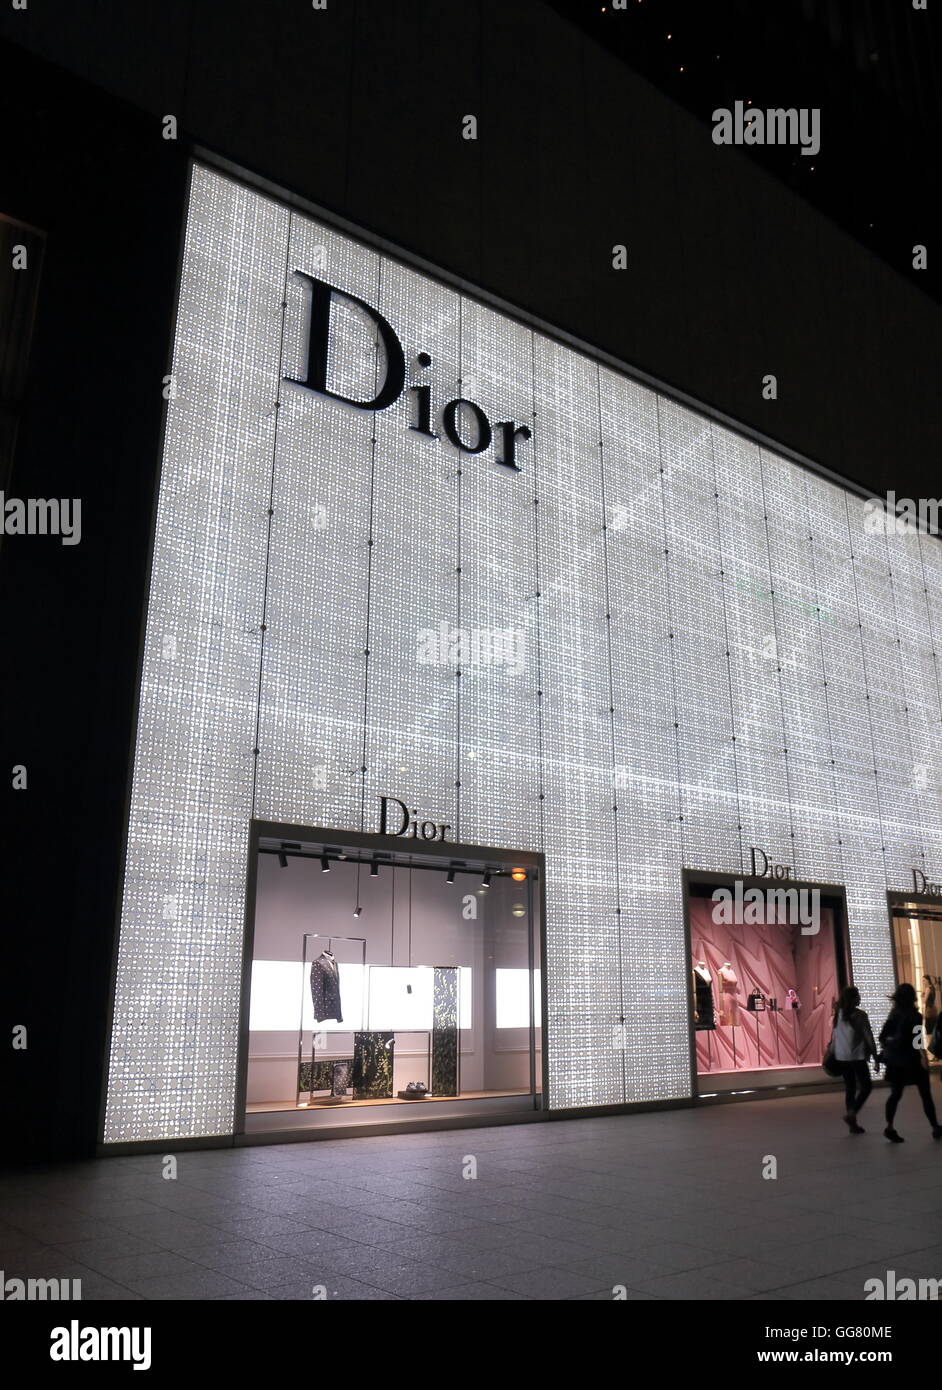 Dior Store In Florence Italy Stock Photo  Download Image Now  Christian  Dior  Designer Label Store Architectural Feature  iStock